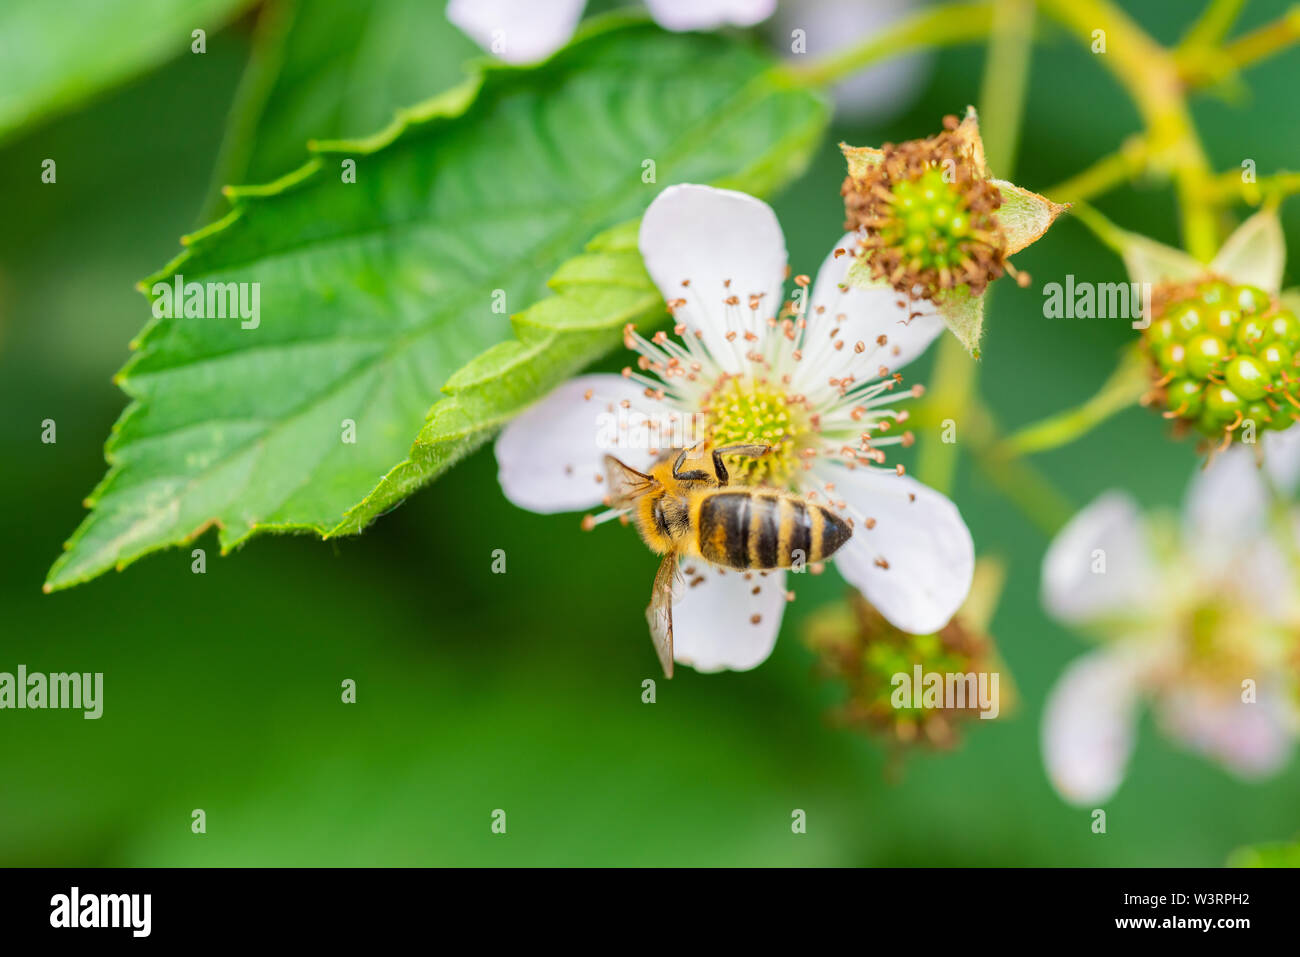 flowers, bees and many other small creatures Stock Photo